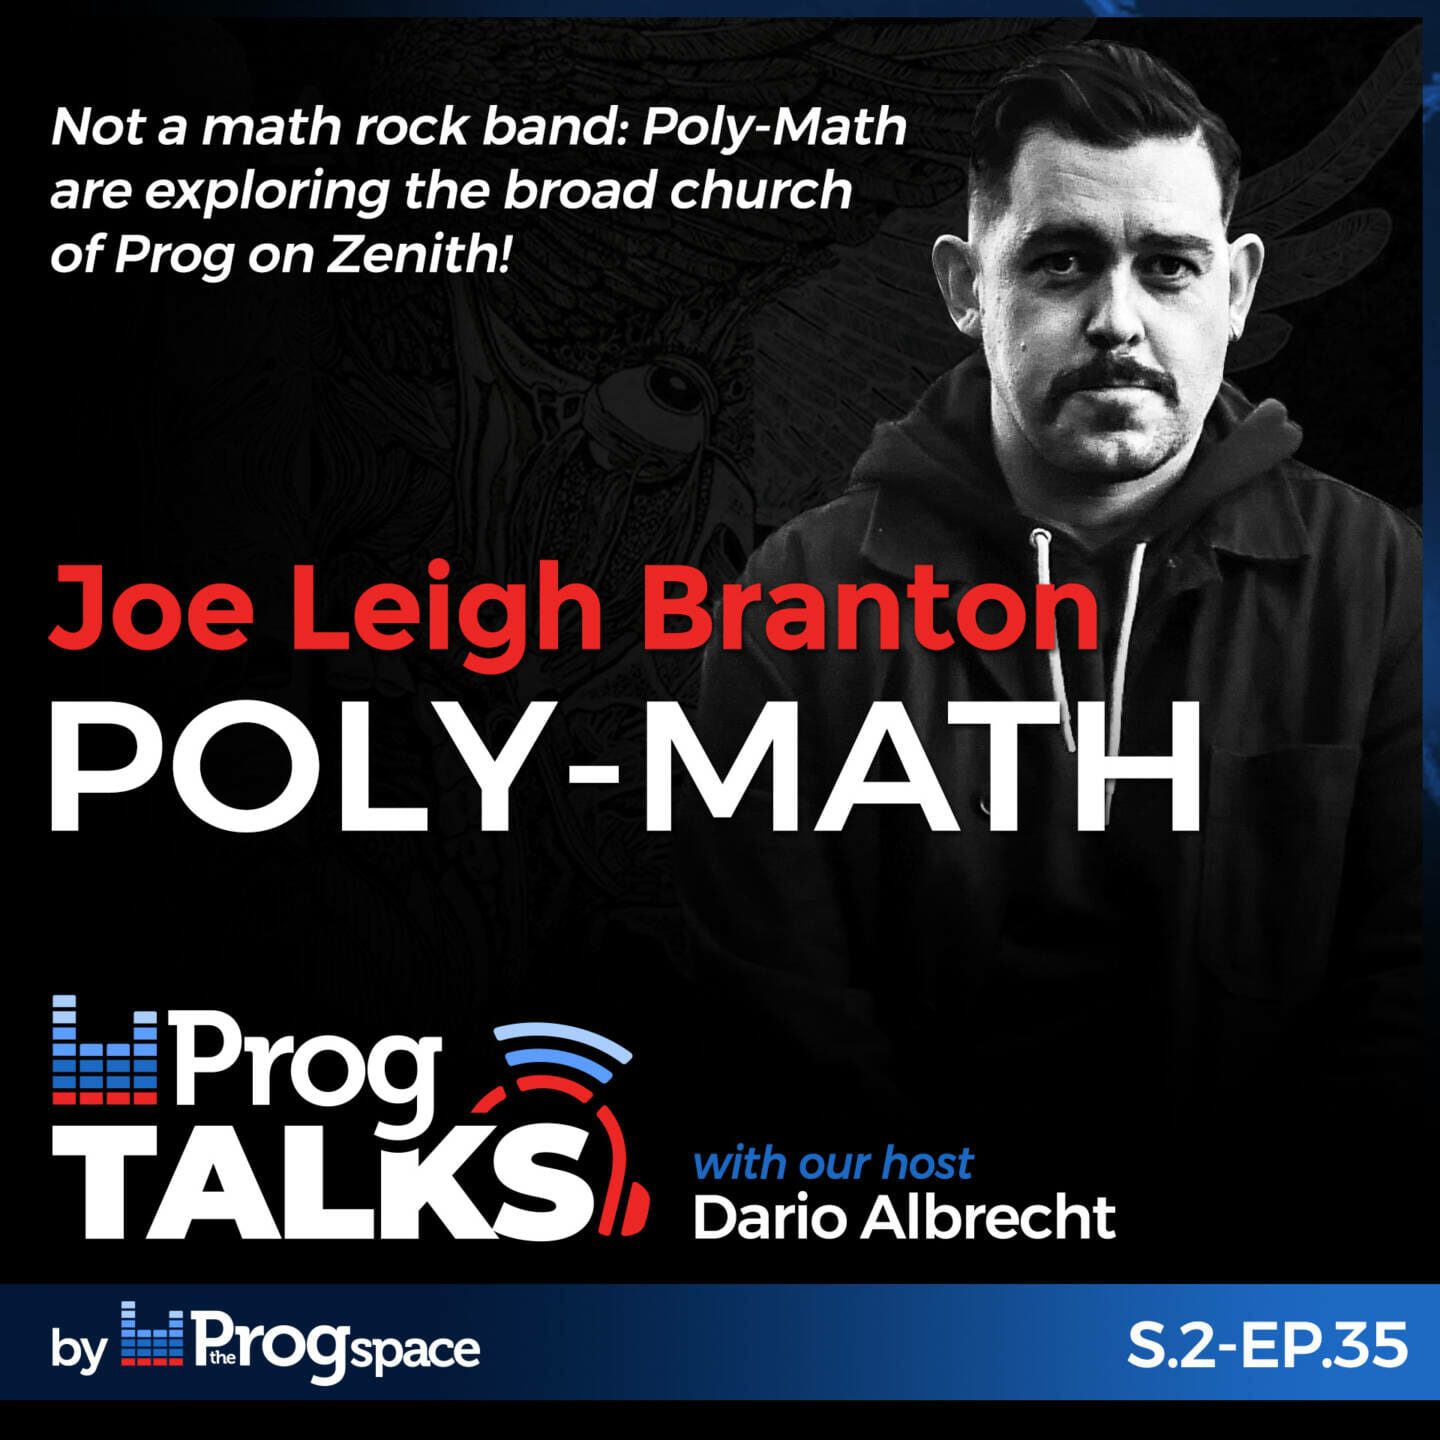 Not a math rock band: Poly-Math are exploring the broad church of Prog on Zenith!